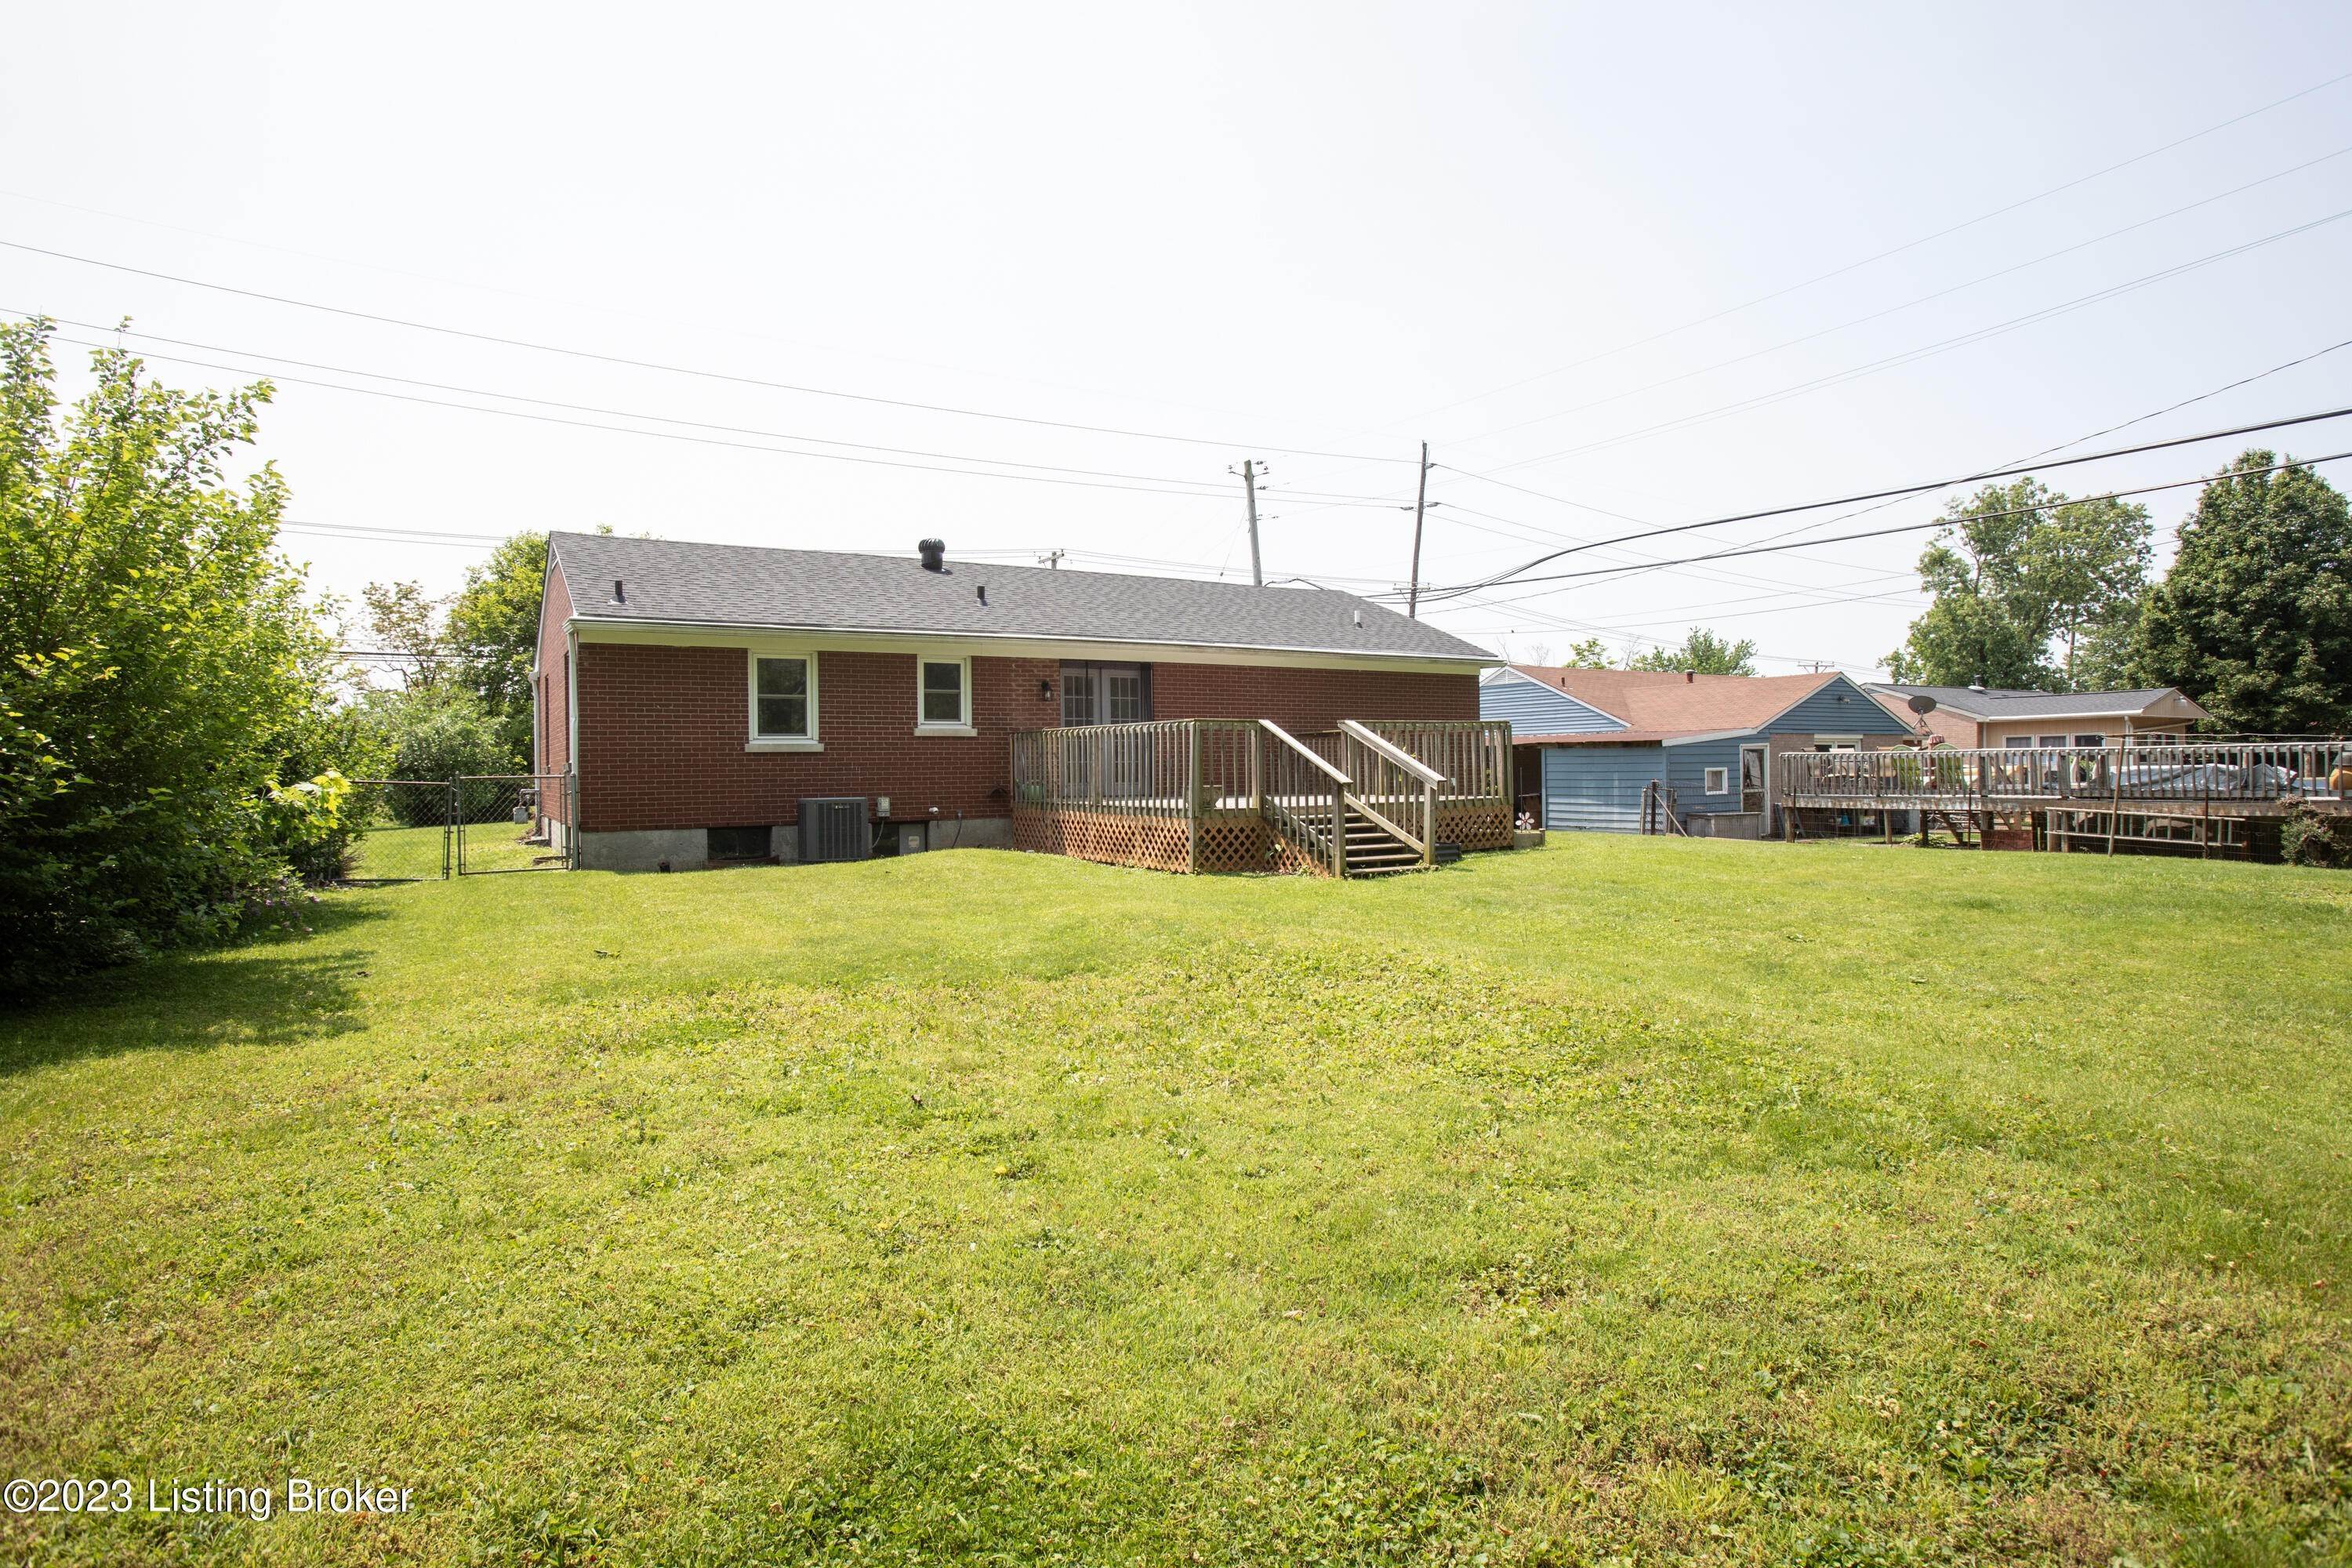 33. Single Family at Louisville, KY 40223